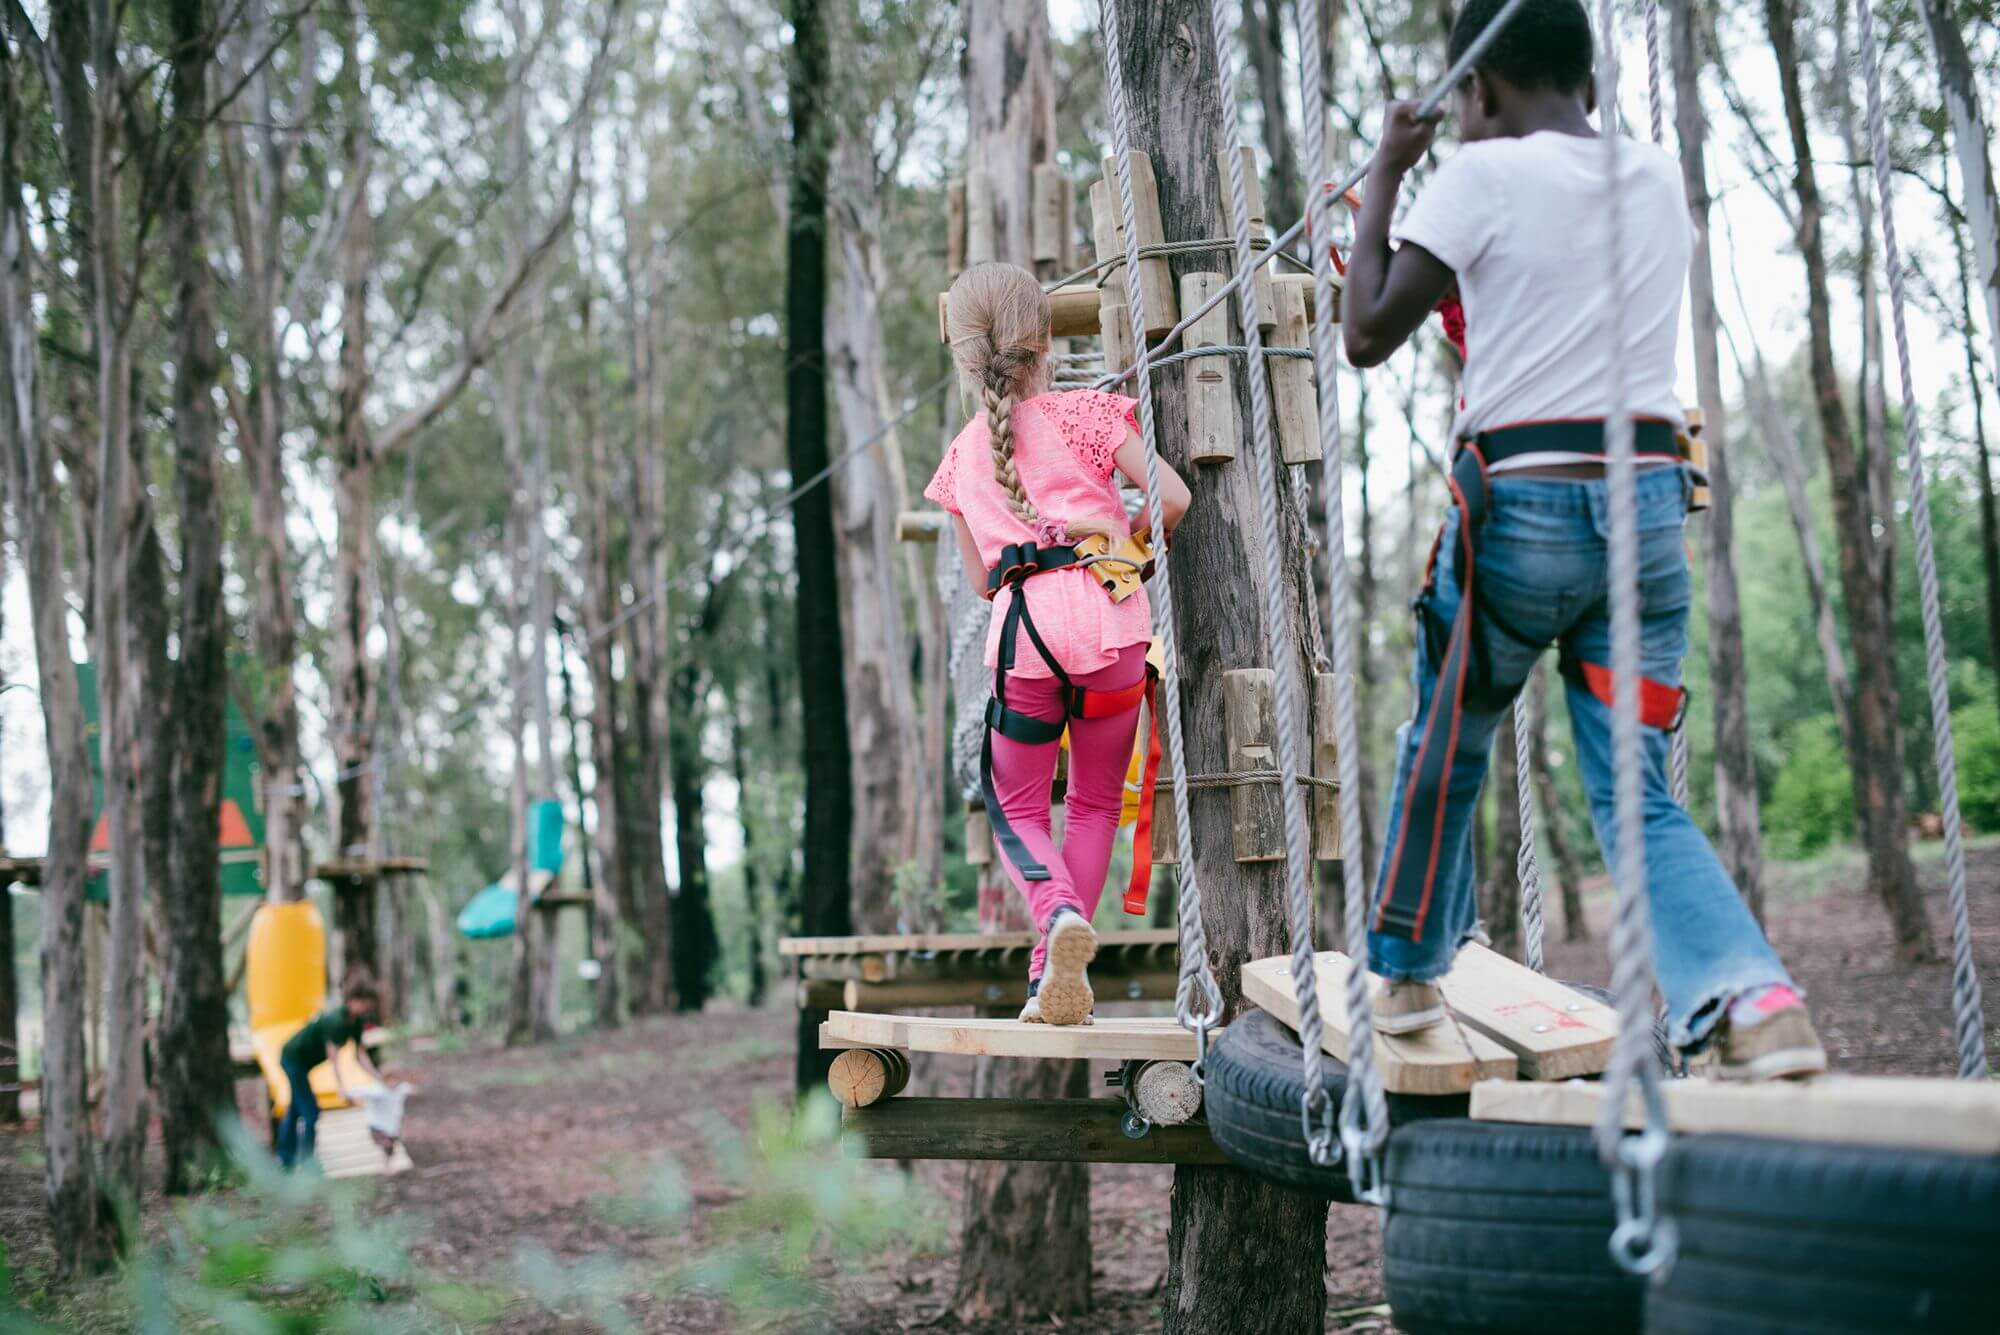 Go on a Treetop Adventure at Acrobranch Huddle Park